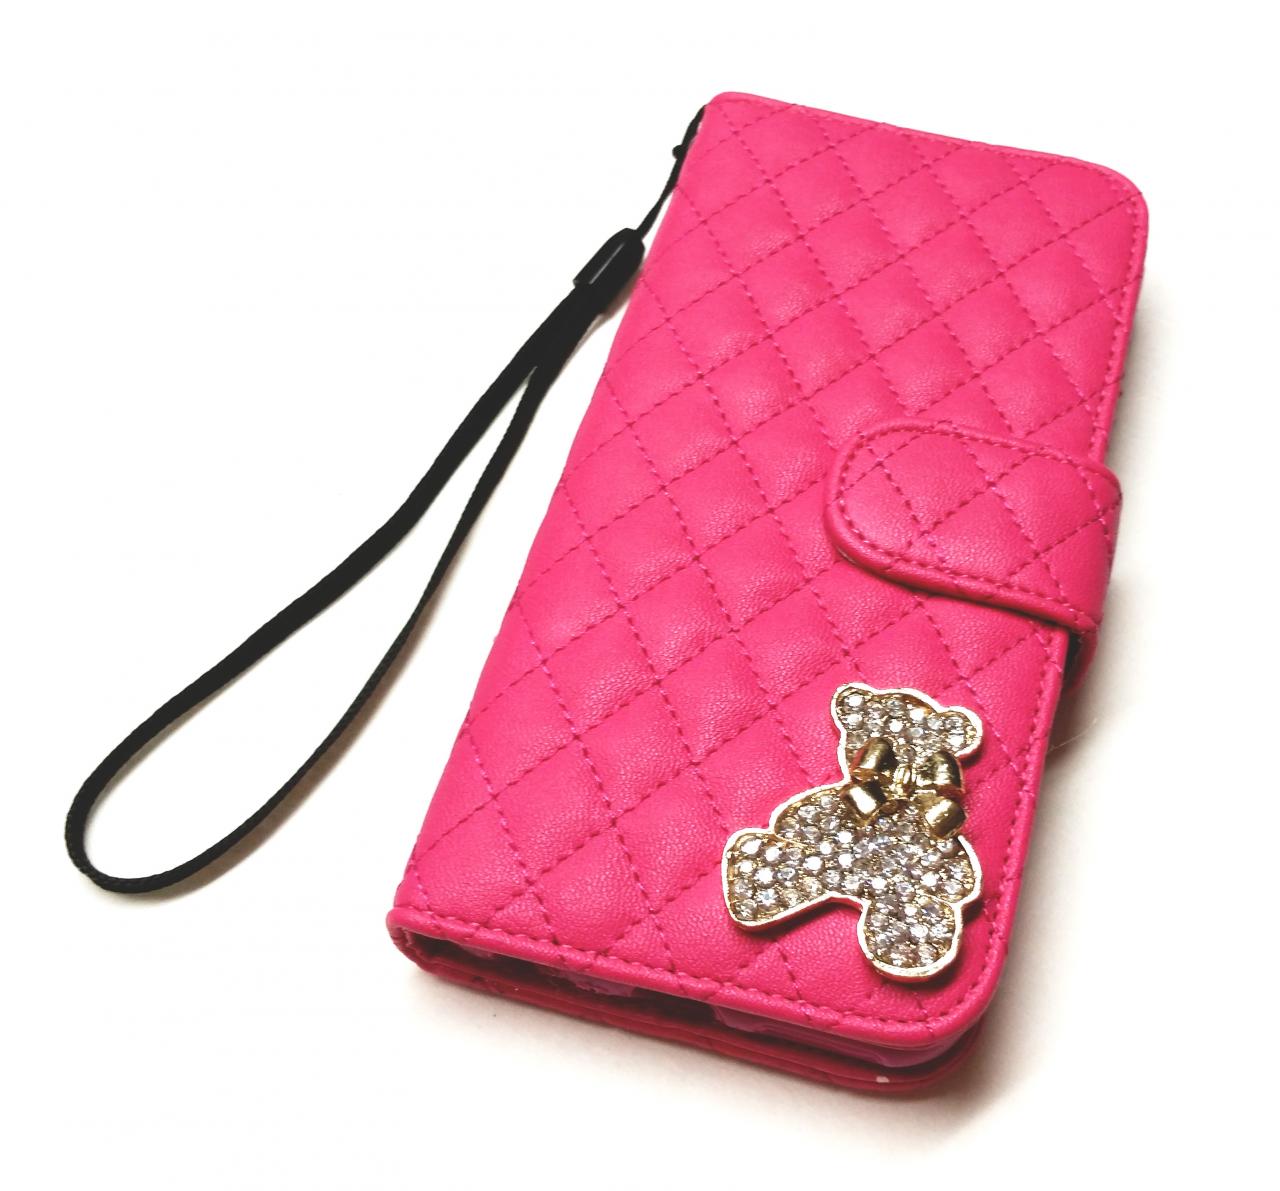 Iphone 6 Case Pink Luxury Leather With Gold Teddy Bear